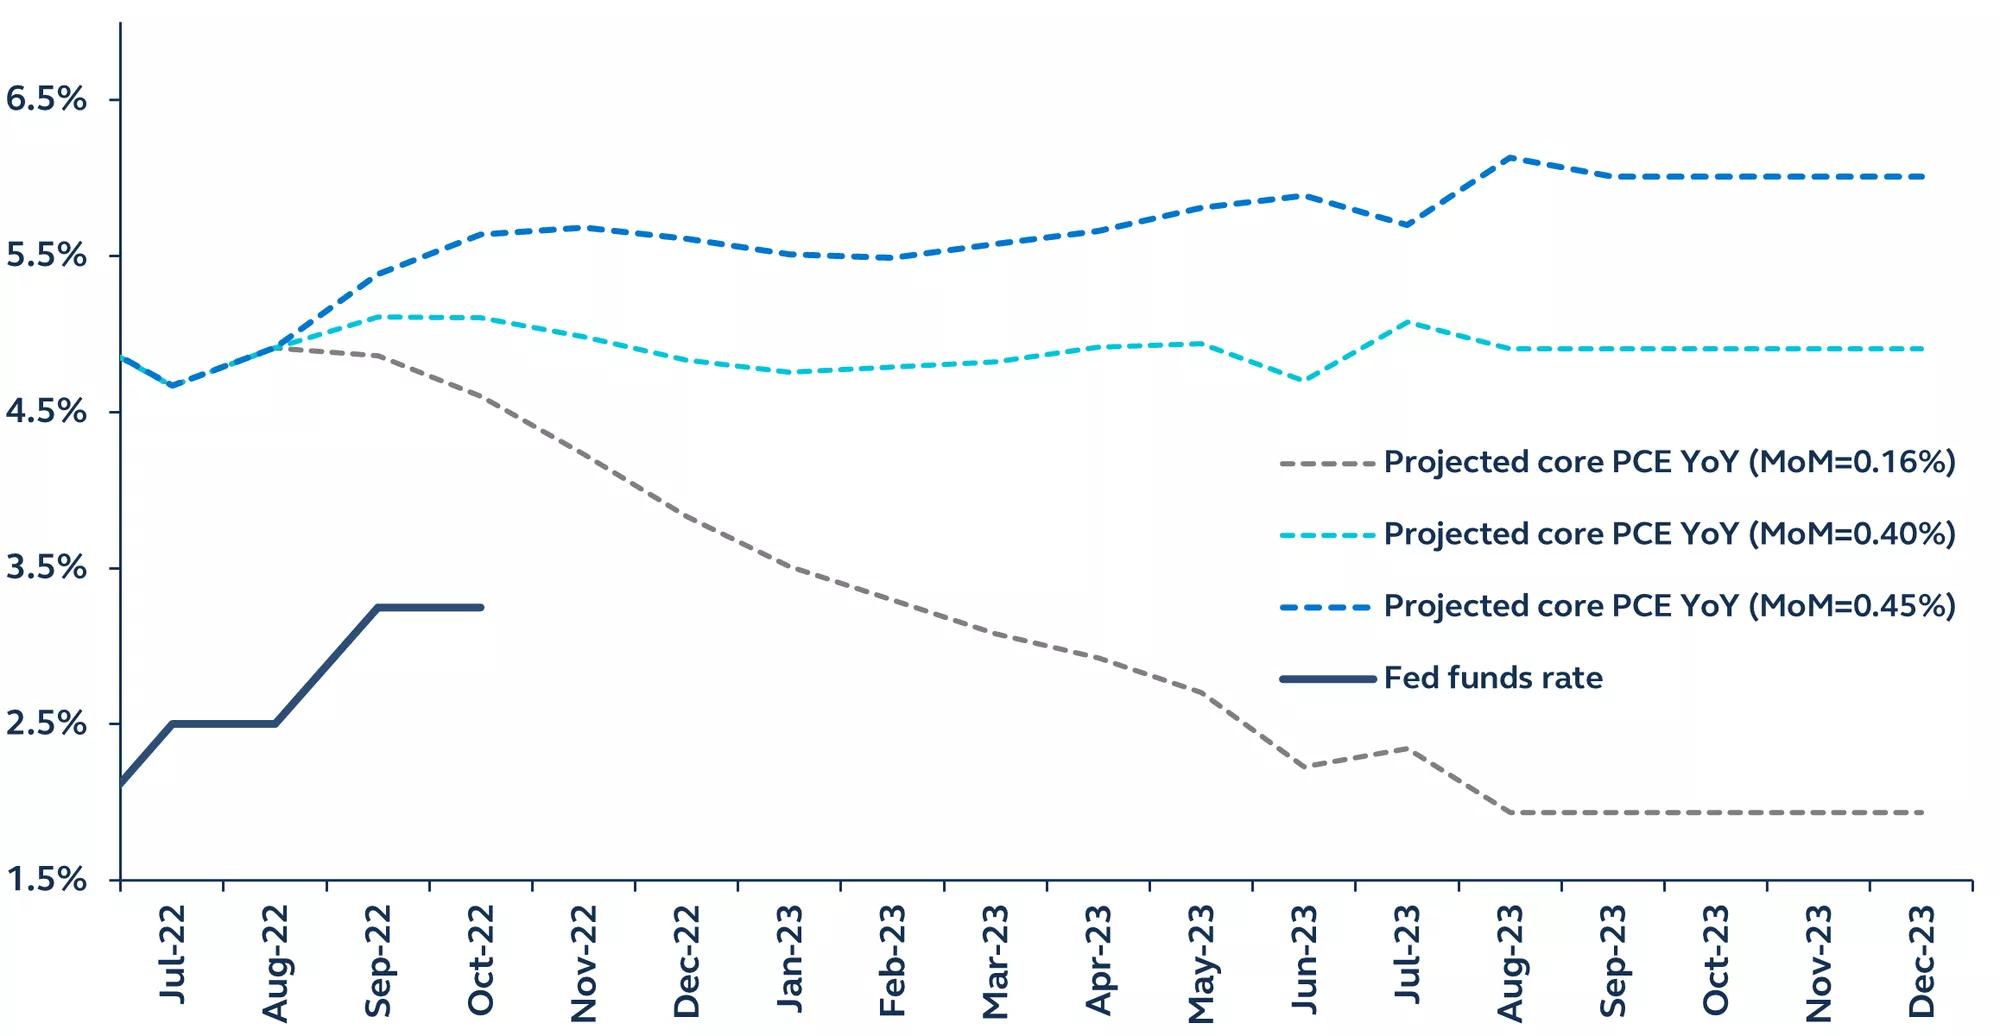 Line graph of projected core PCE and the Federal funds rate from July 2022-August 31, 2022